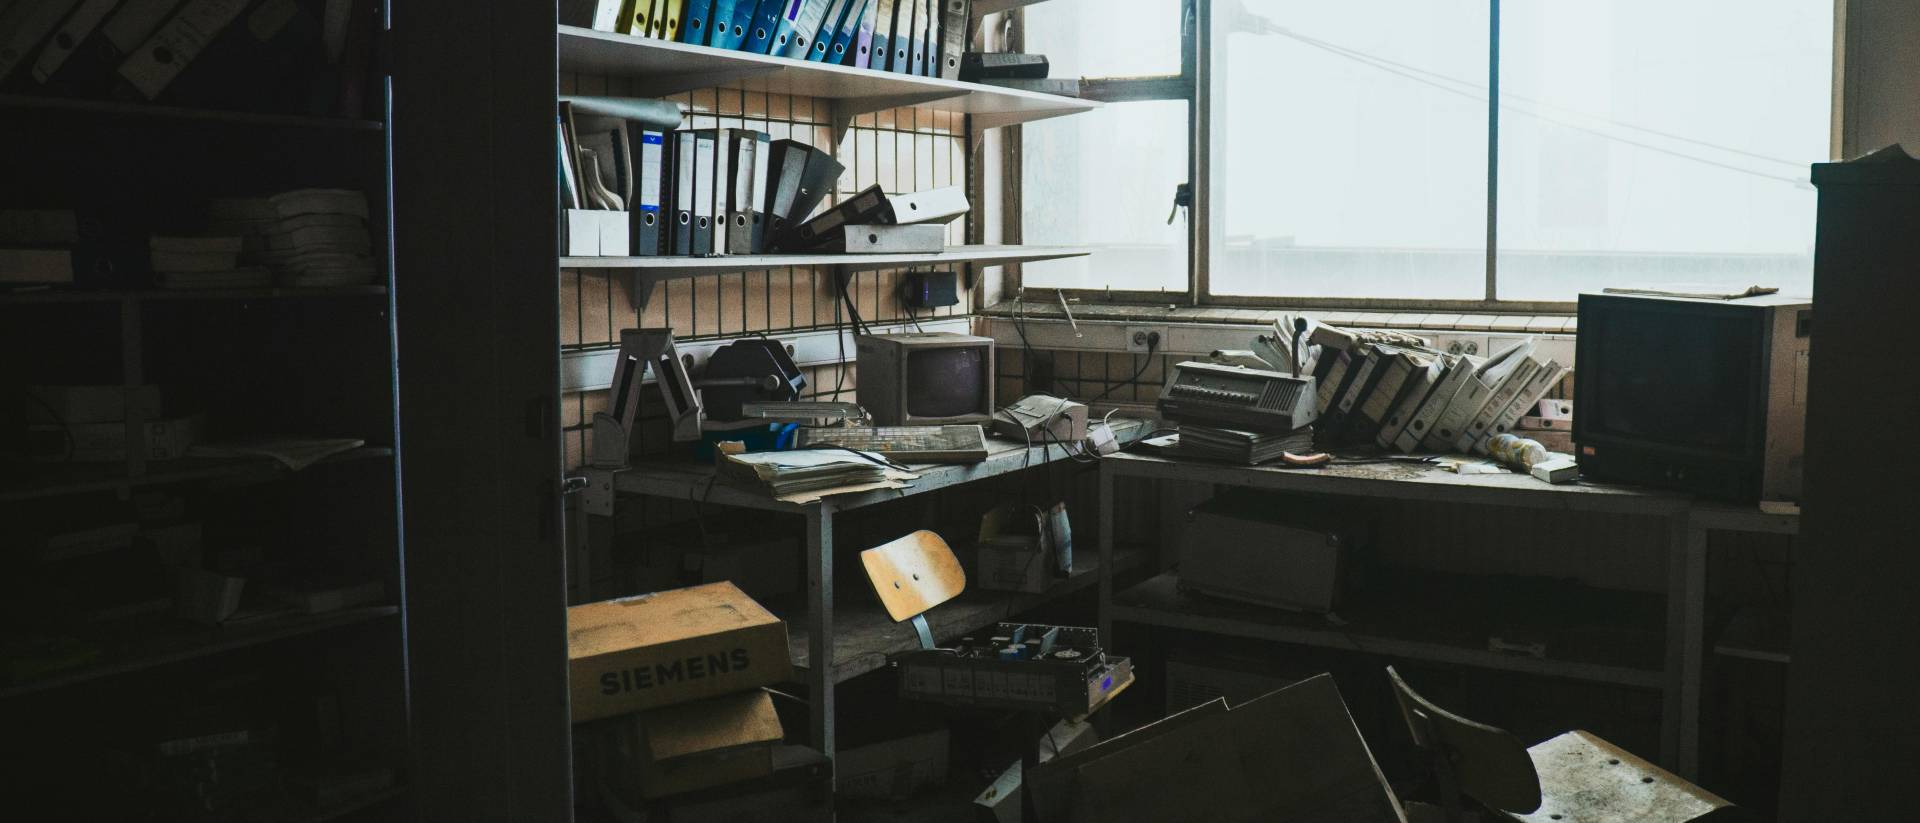 Old, cluttered, computer office